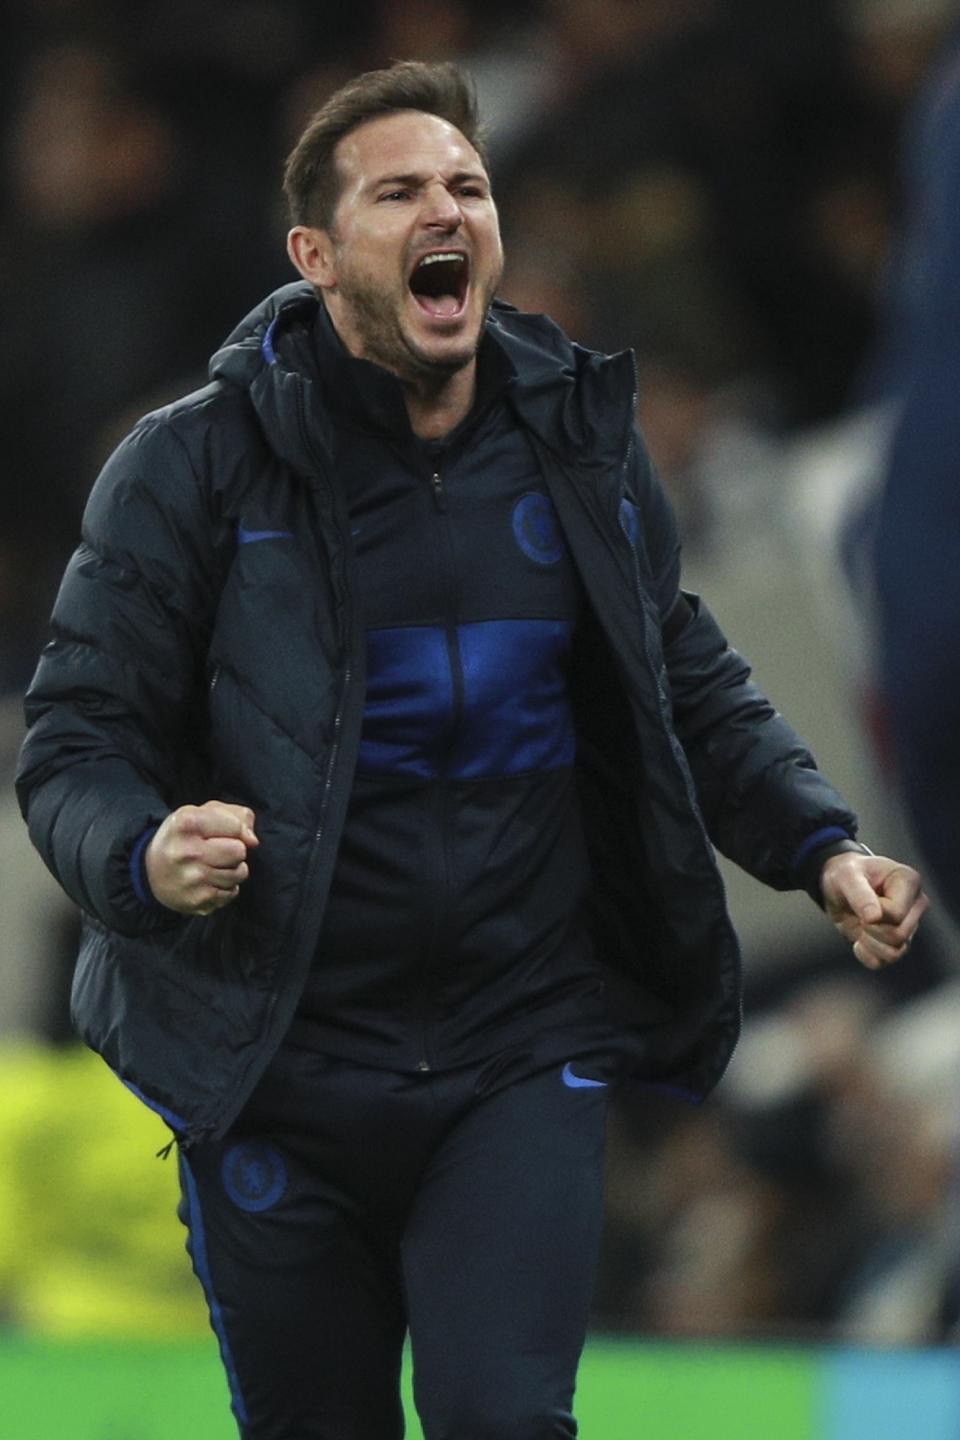 Chelsea's head coach Frank Lampard celebrates after Willian scored his side's second goal during the English Premier League soccer match between Tottenham Hotspur and Chelsea, at the Tottenham Hotspur Stadium in London, Sunday, Dec. 22, 2019. (AP Photo/Ian Walton)